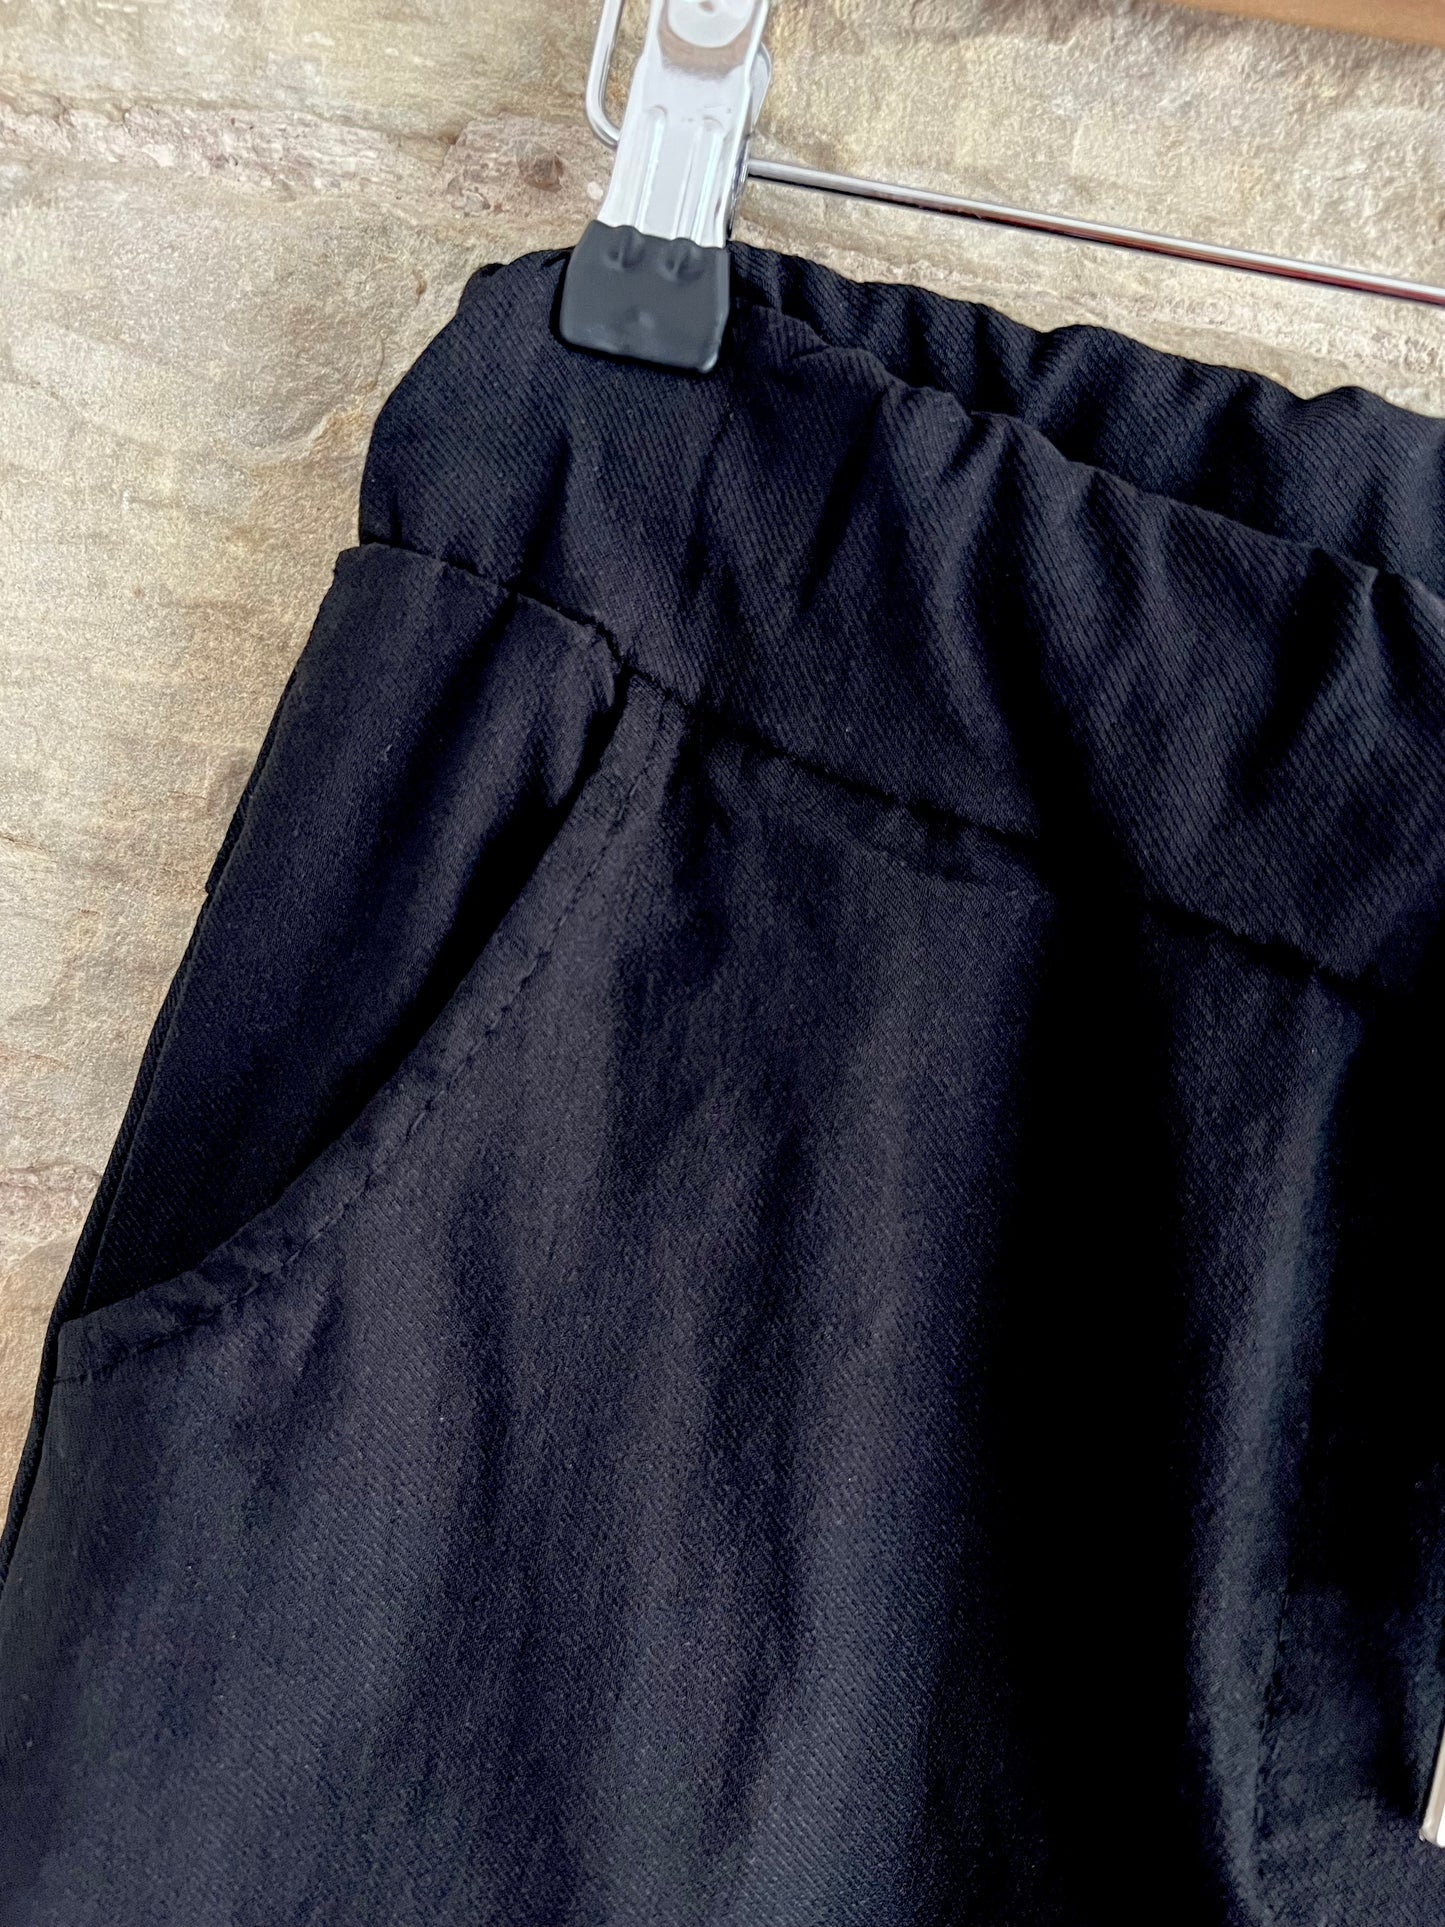 SMOOTH Magic Trousers - WRINKLE FREE - 2 Sizes - Black